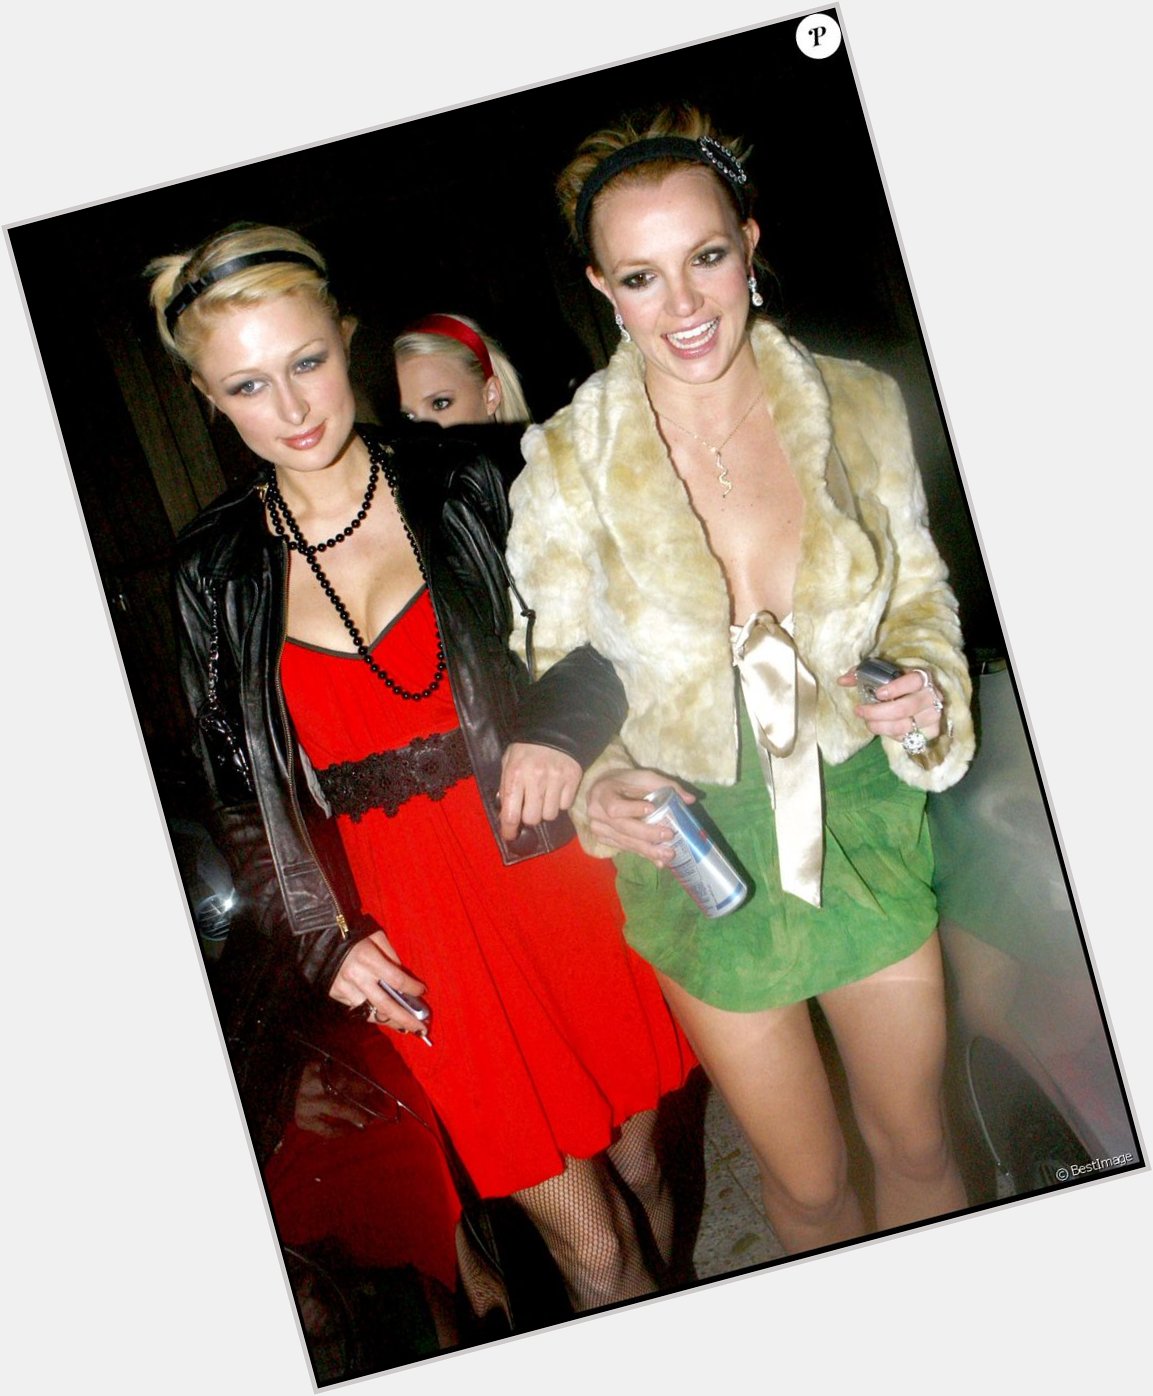 Britney Spears and Paris Hilton before and after the party. How ICONIC !

Happy Birthday   